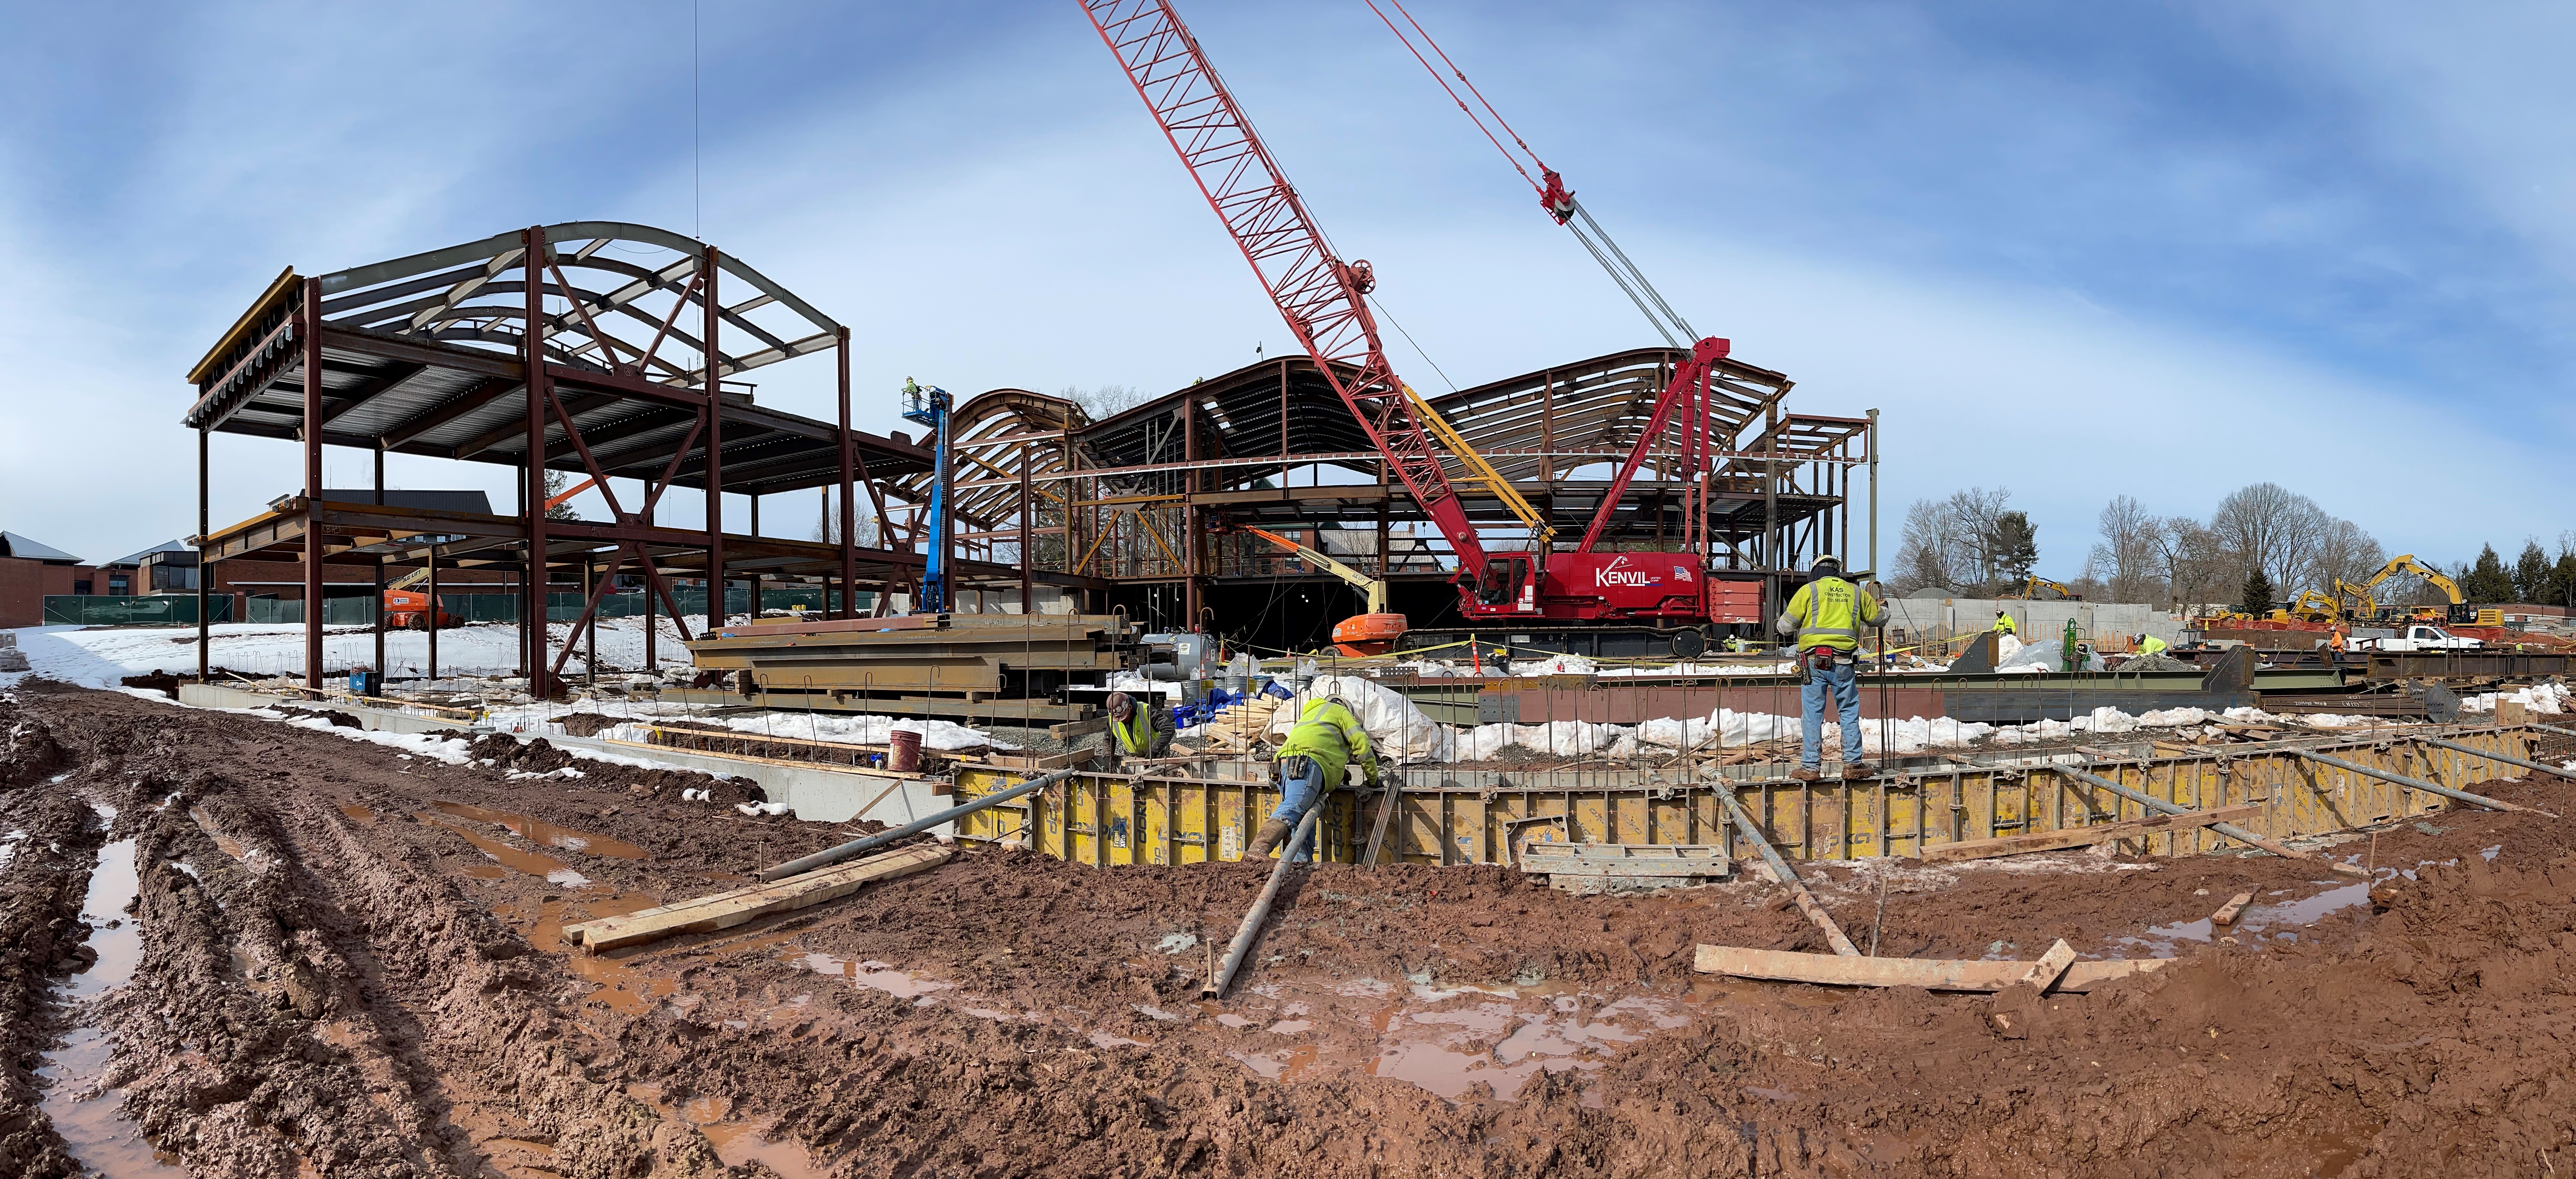 Photograph of entire building and construction site with crane and workers